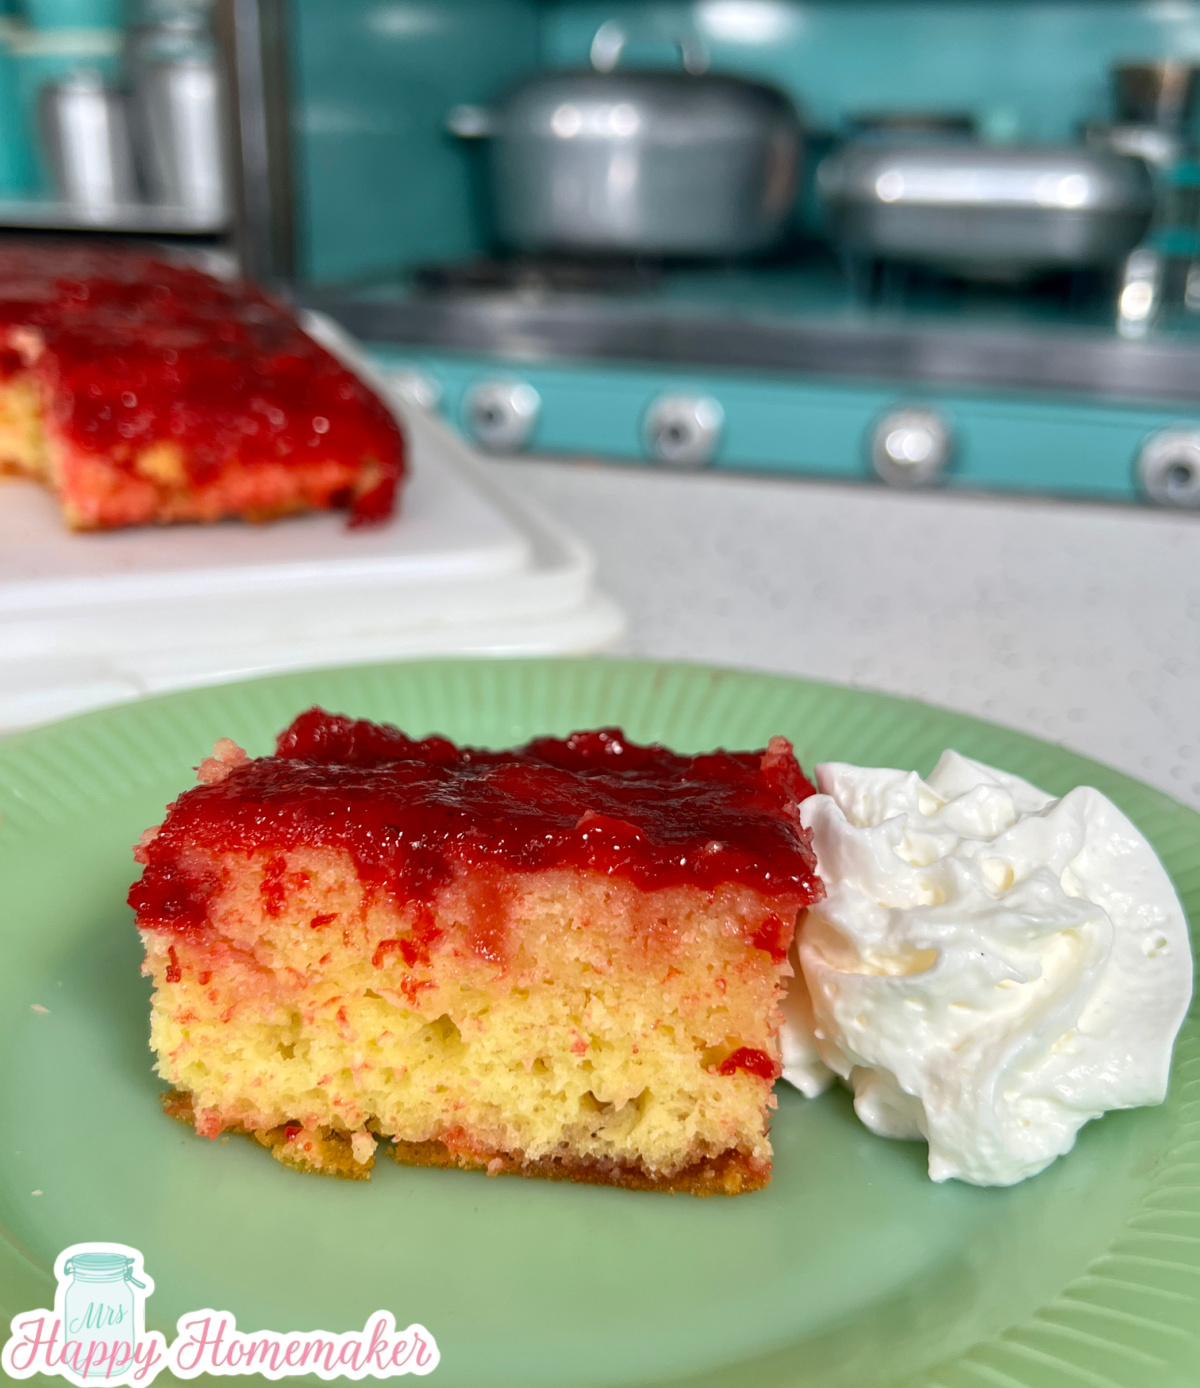 Strawberry Upside Down Cake on a green plate with a dollop of whipped cream on the side. There is a blue stove in the background